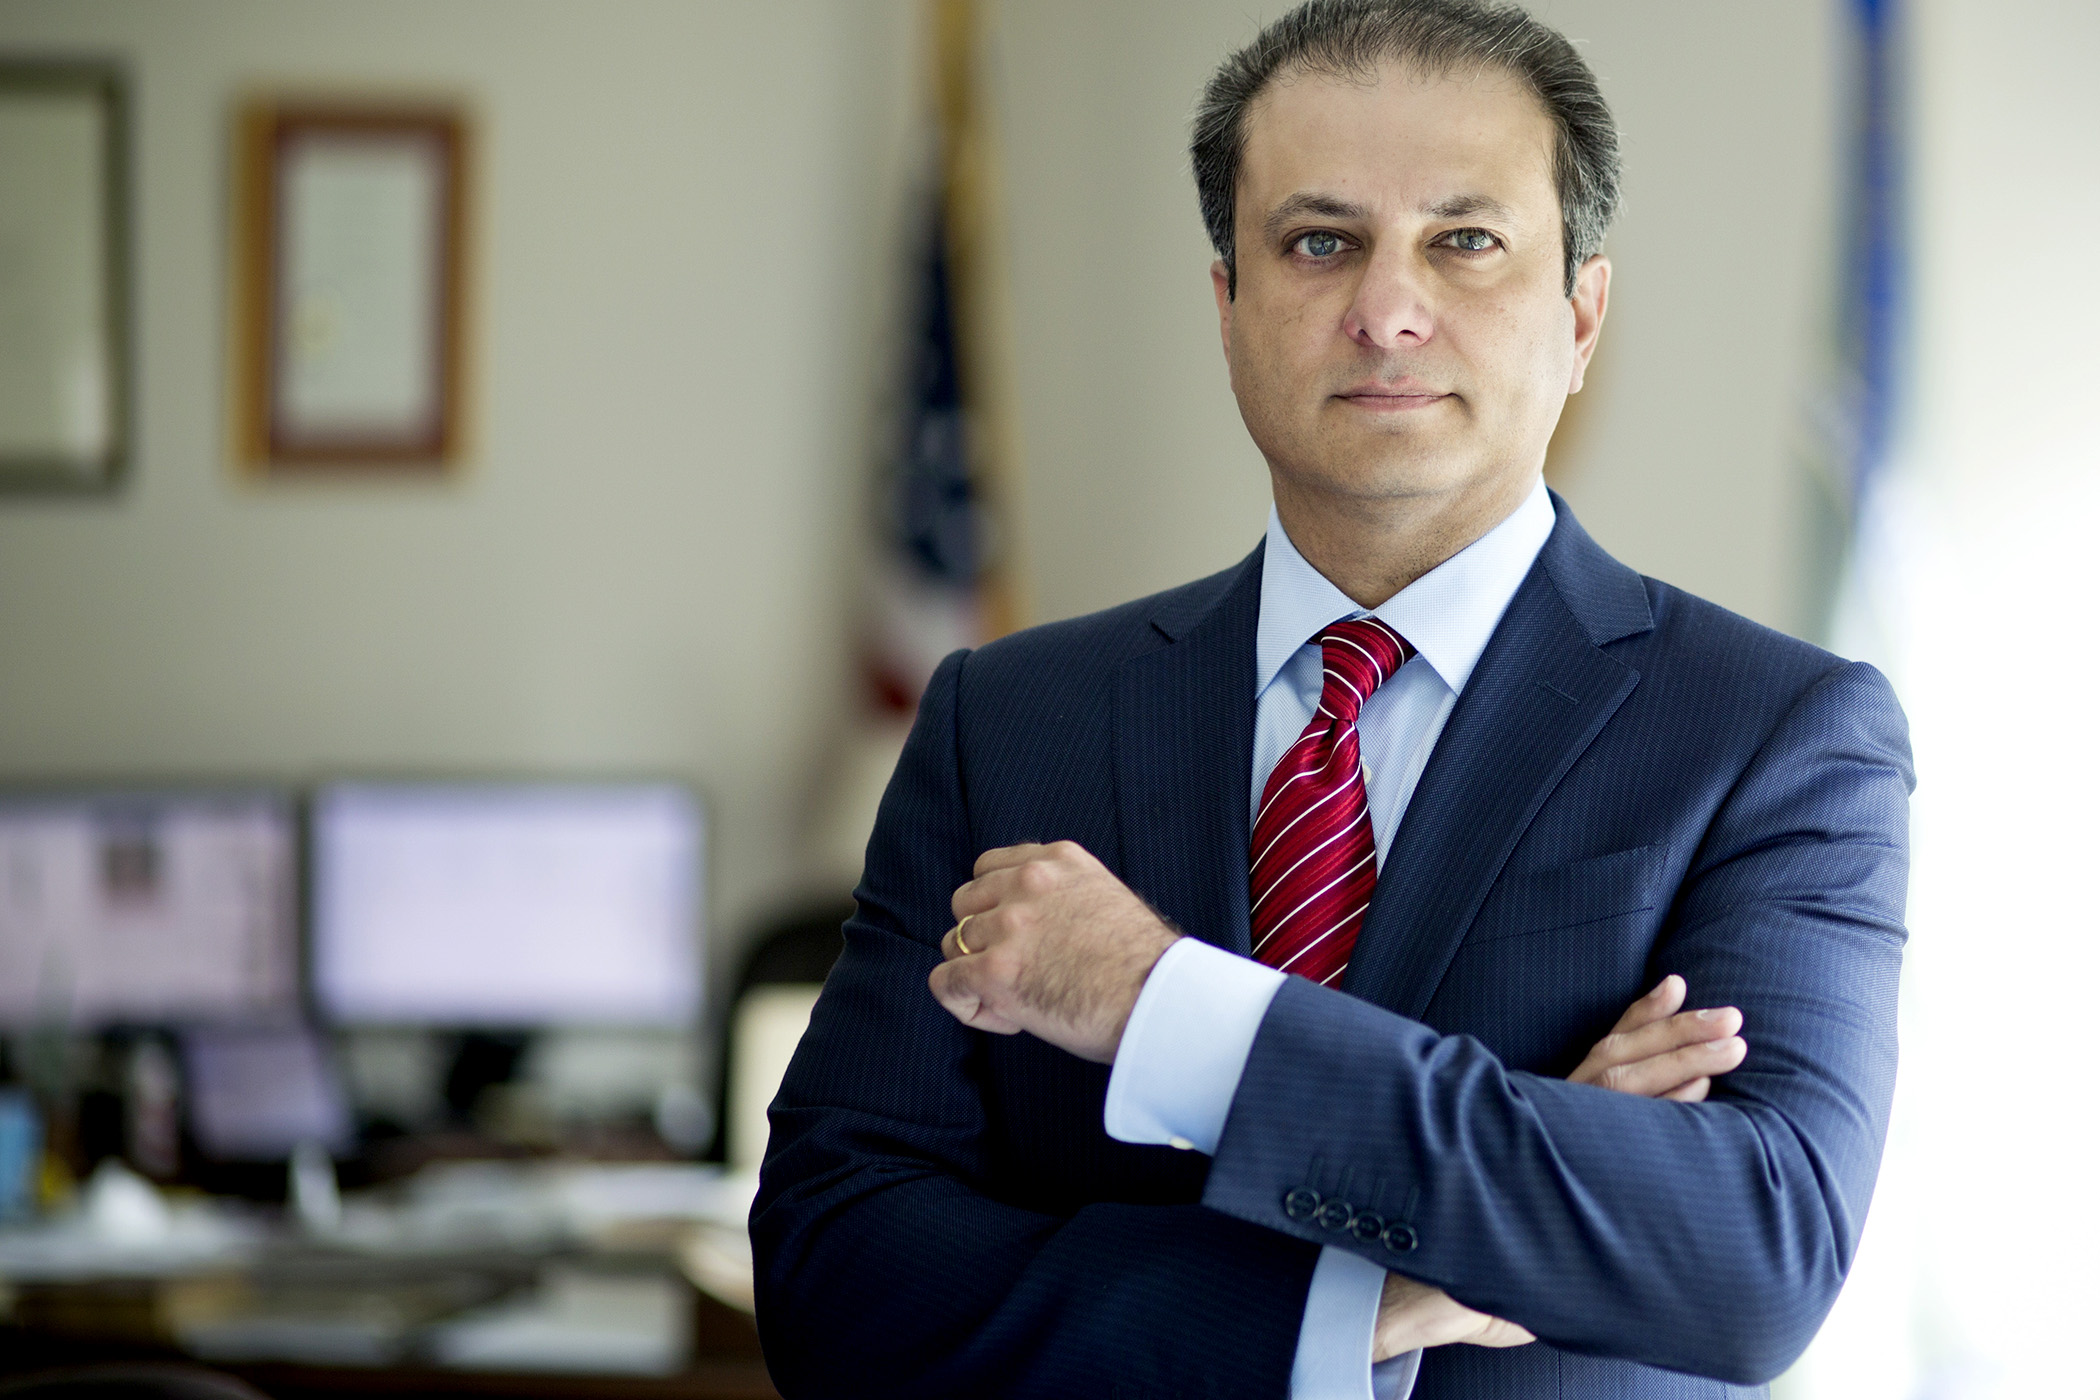 Preet Bharara, five years into his tenure as U.S. attorney for the Southern District of New York, in New York.